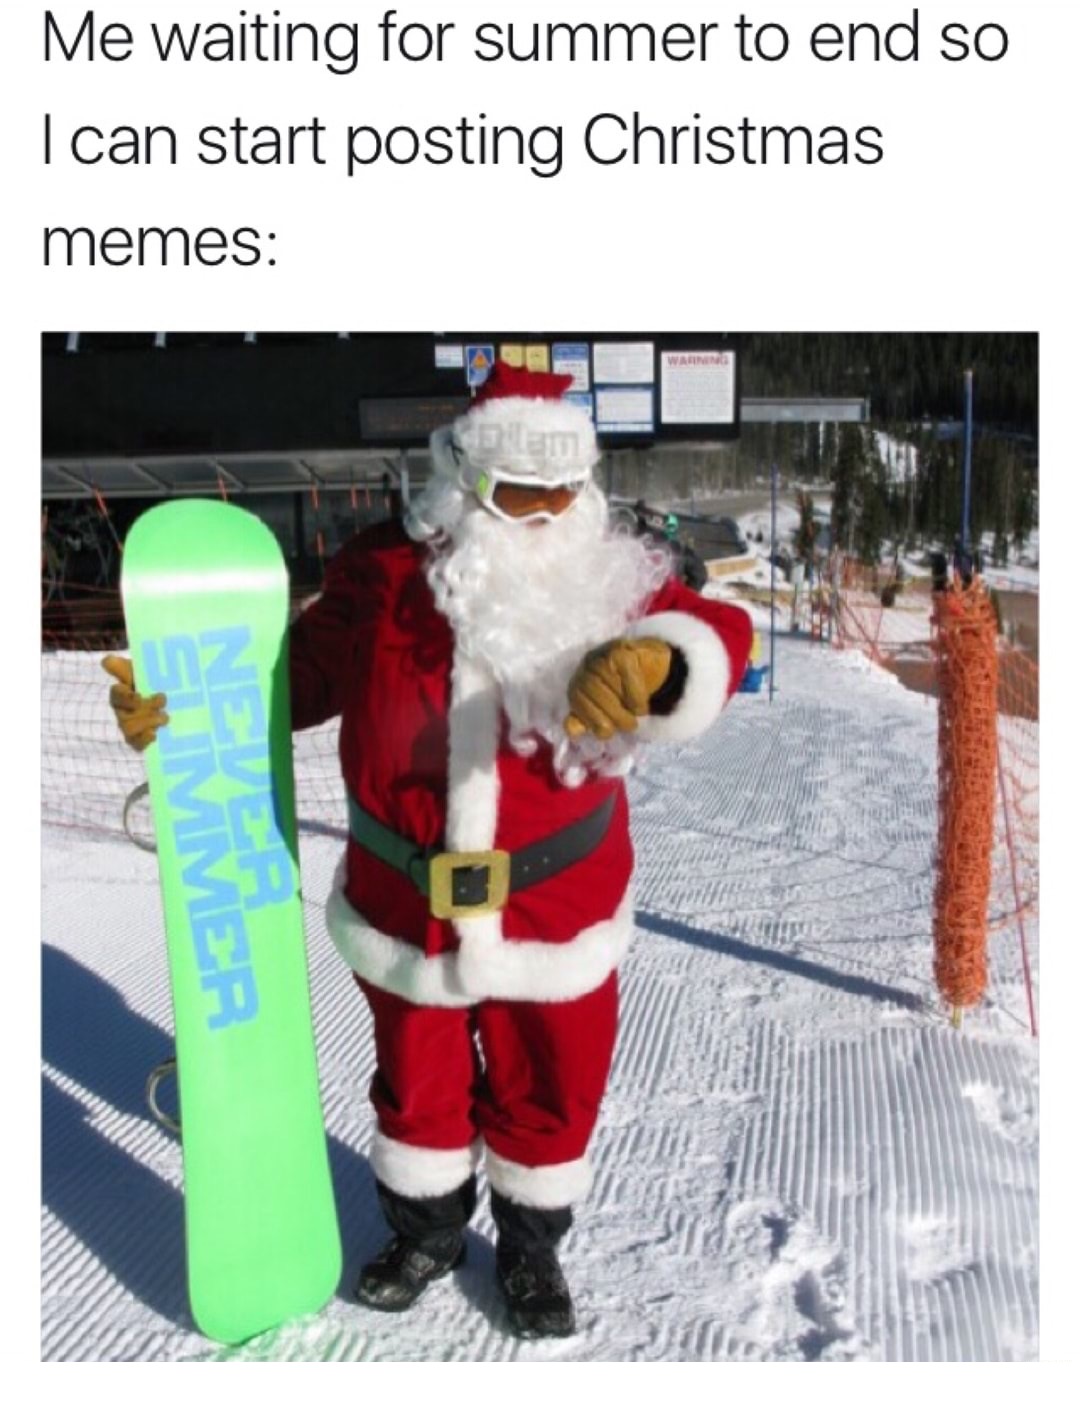 Santa Clause with a Snowboard looking at his watch, captioned as meme that Christmas memes start right after summer vacation